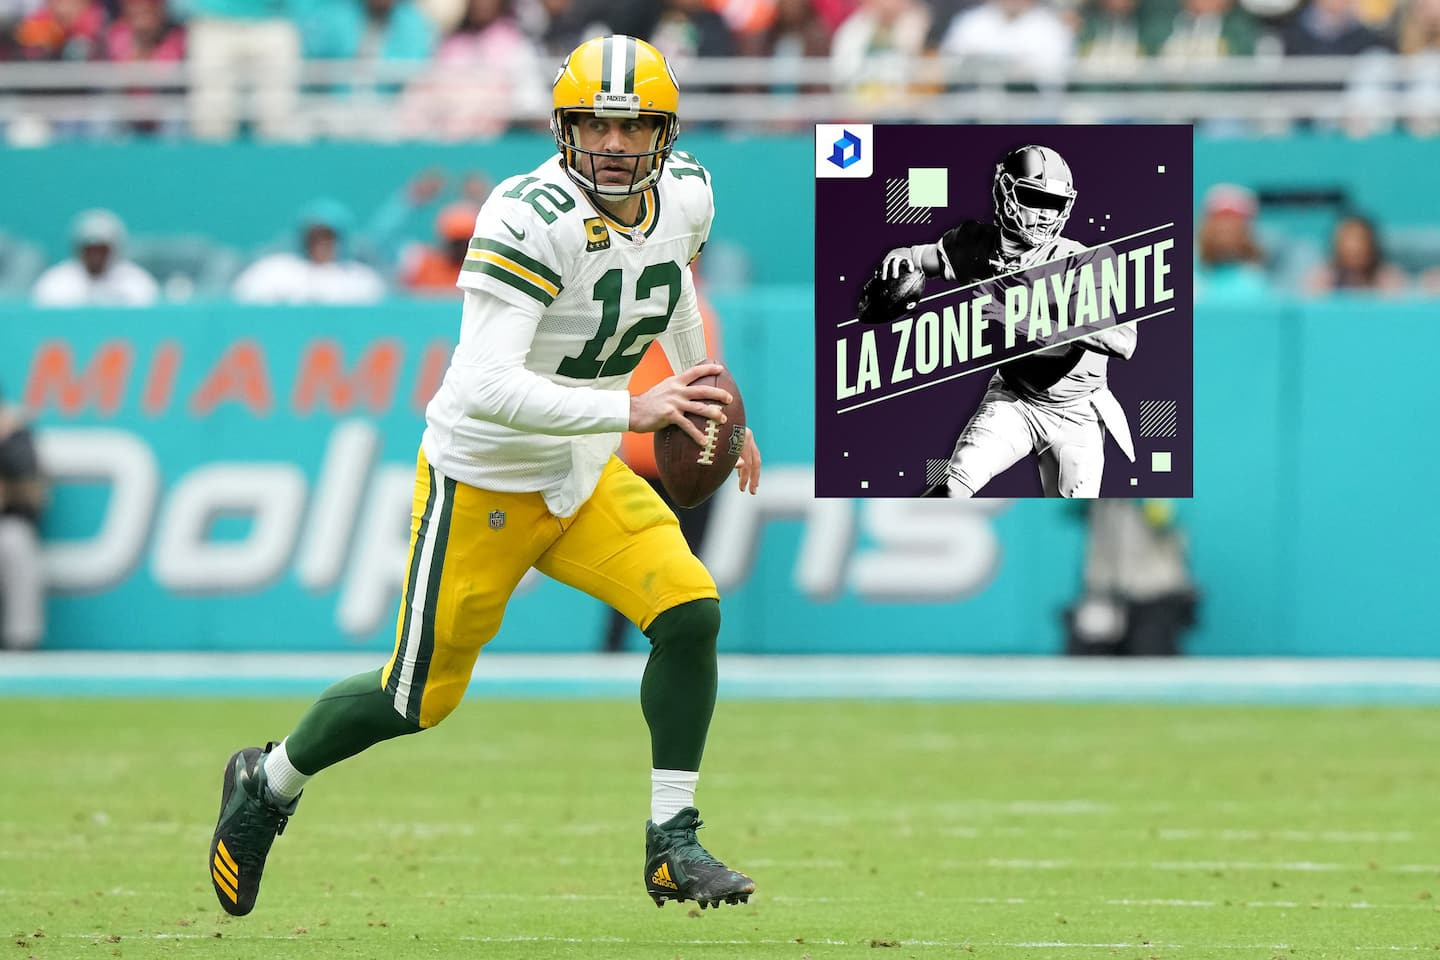 [PODCAST] “The Paying Zone”: the hour of the last chance for Brady and Rodgers